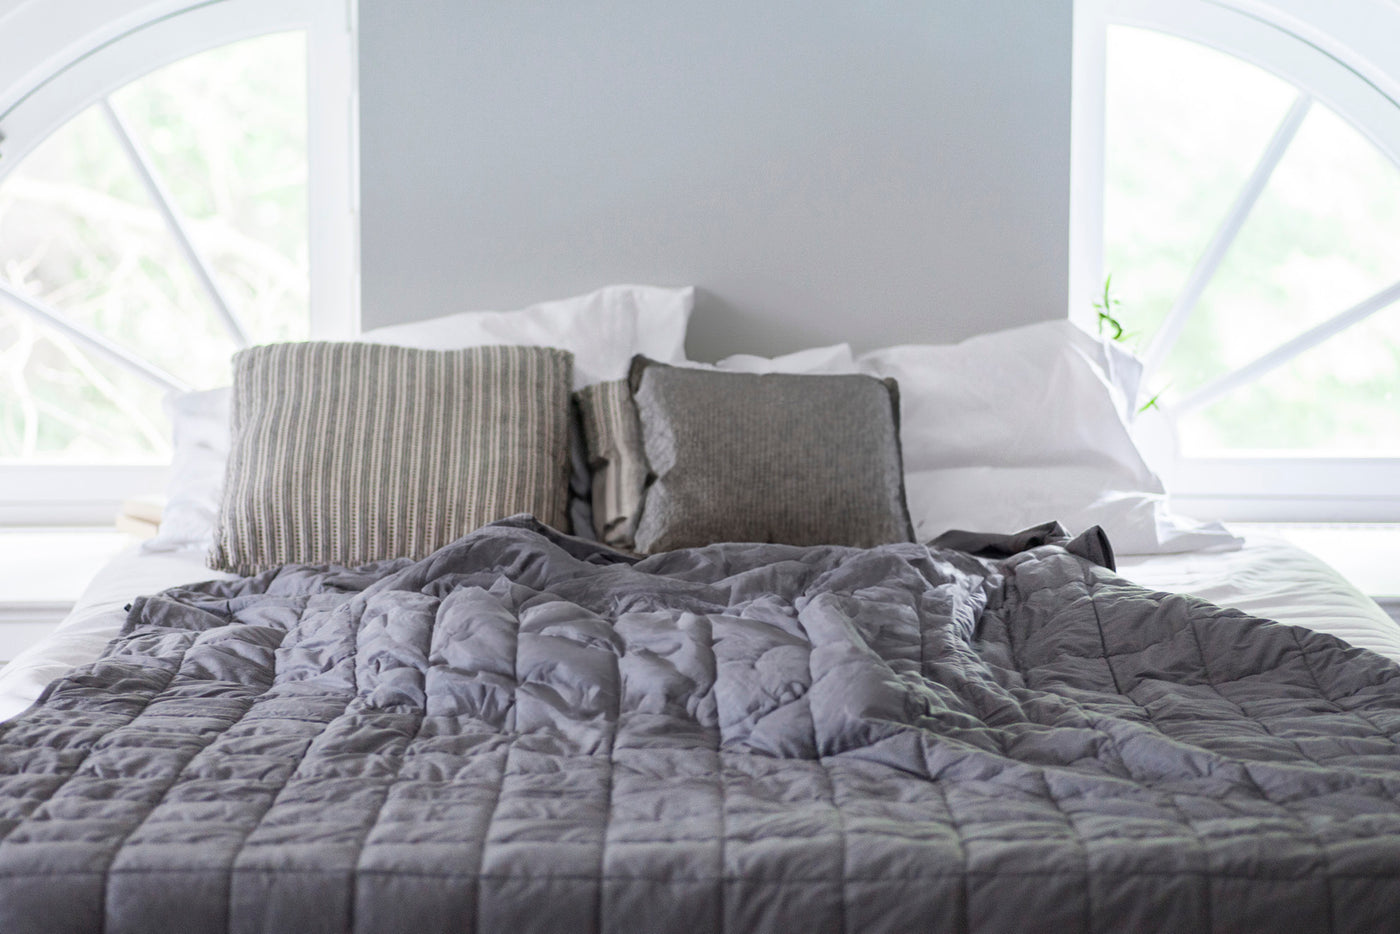 Image of a bed in a bright white room with white sheets and a gray Weighted Blanket on top